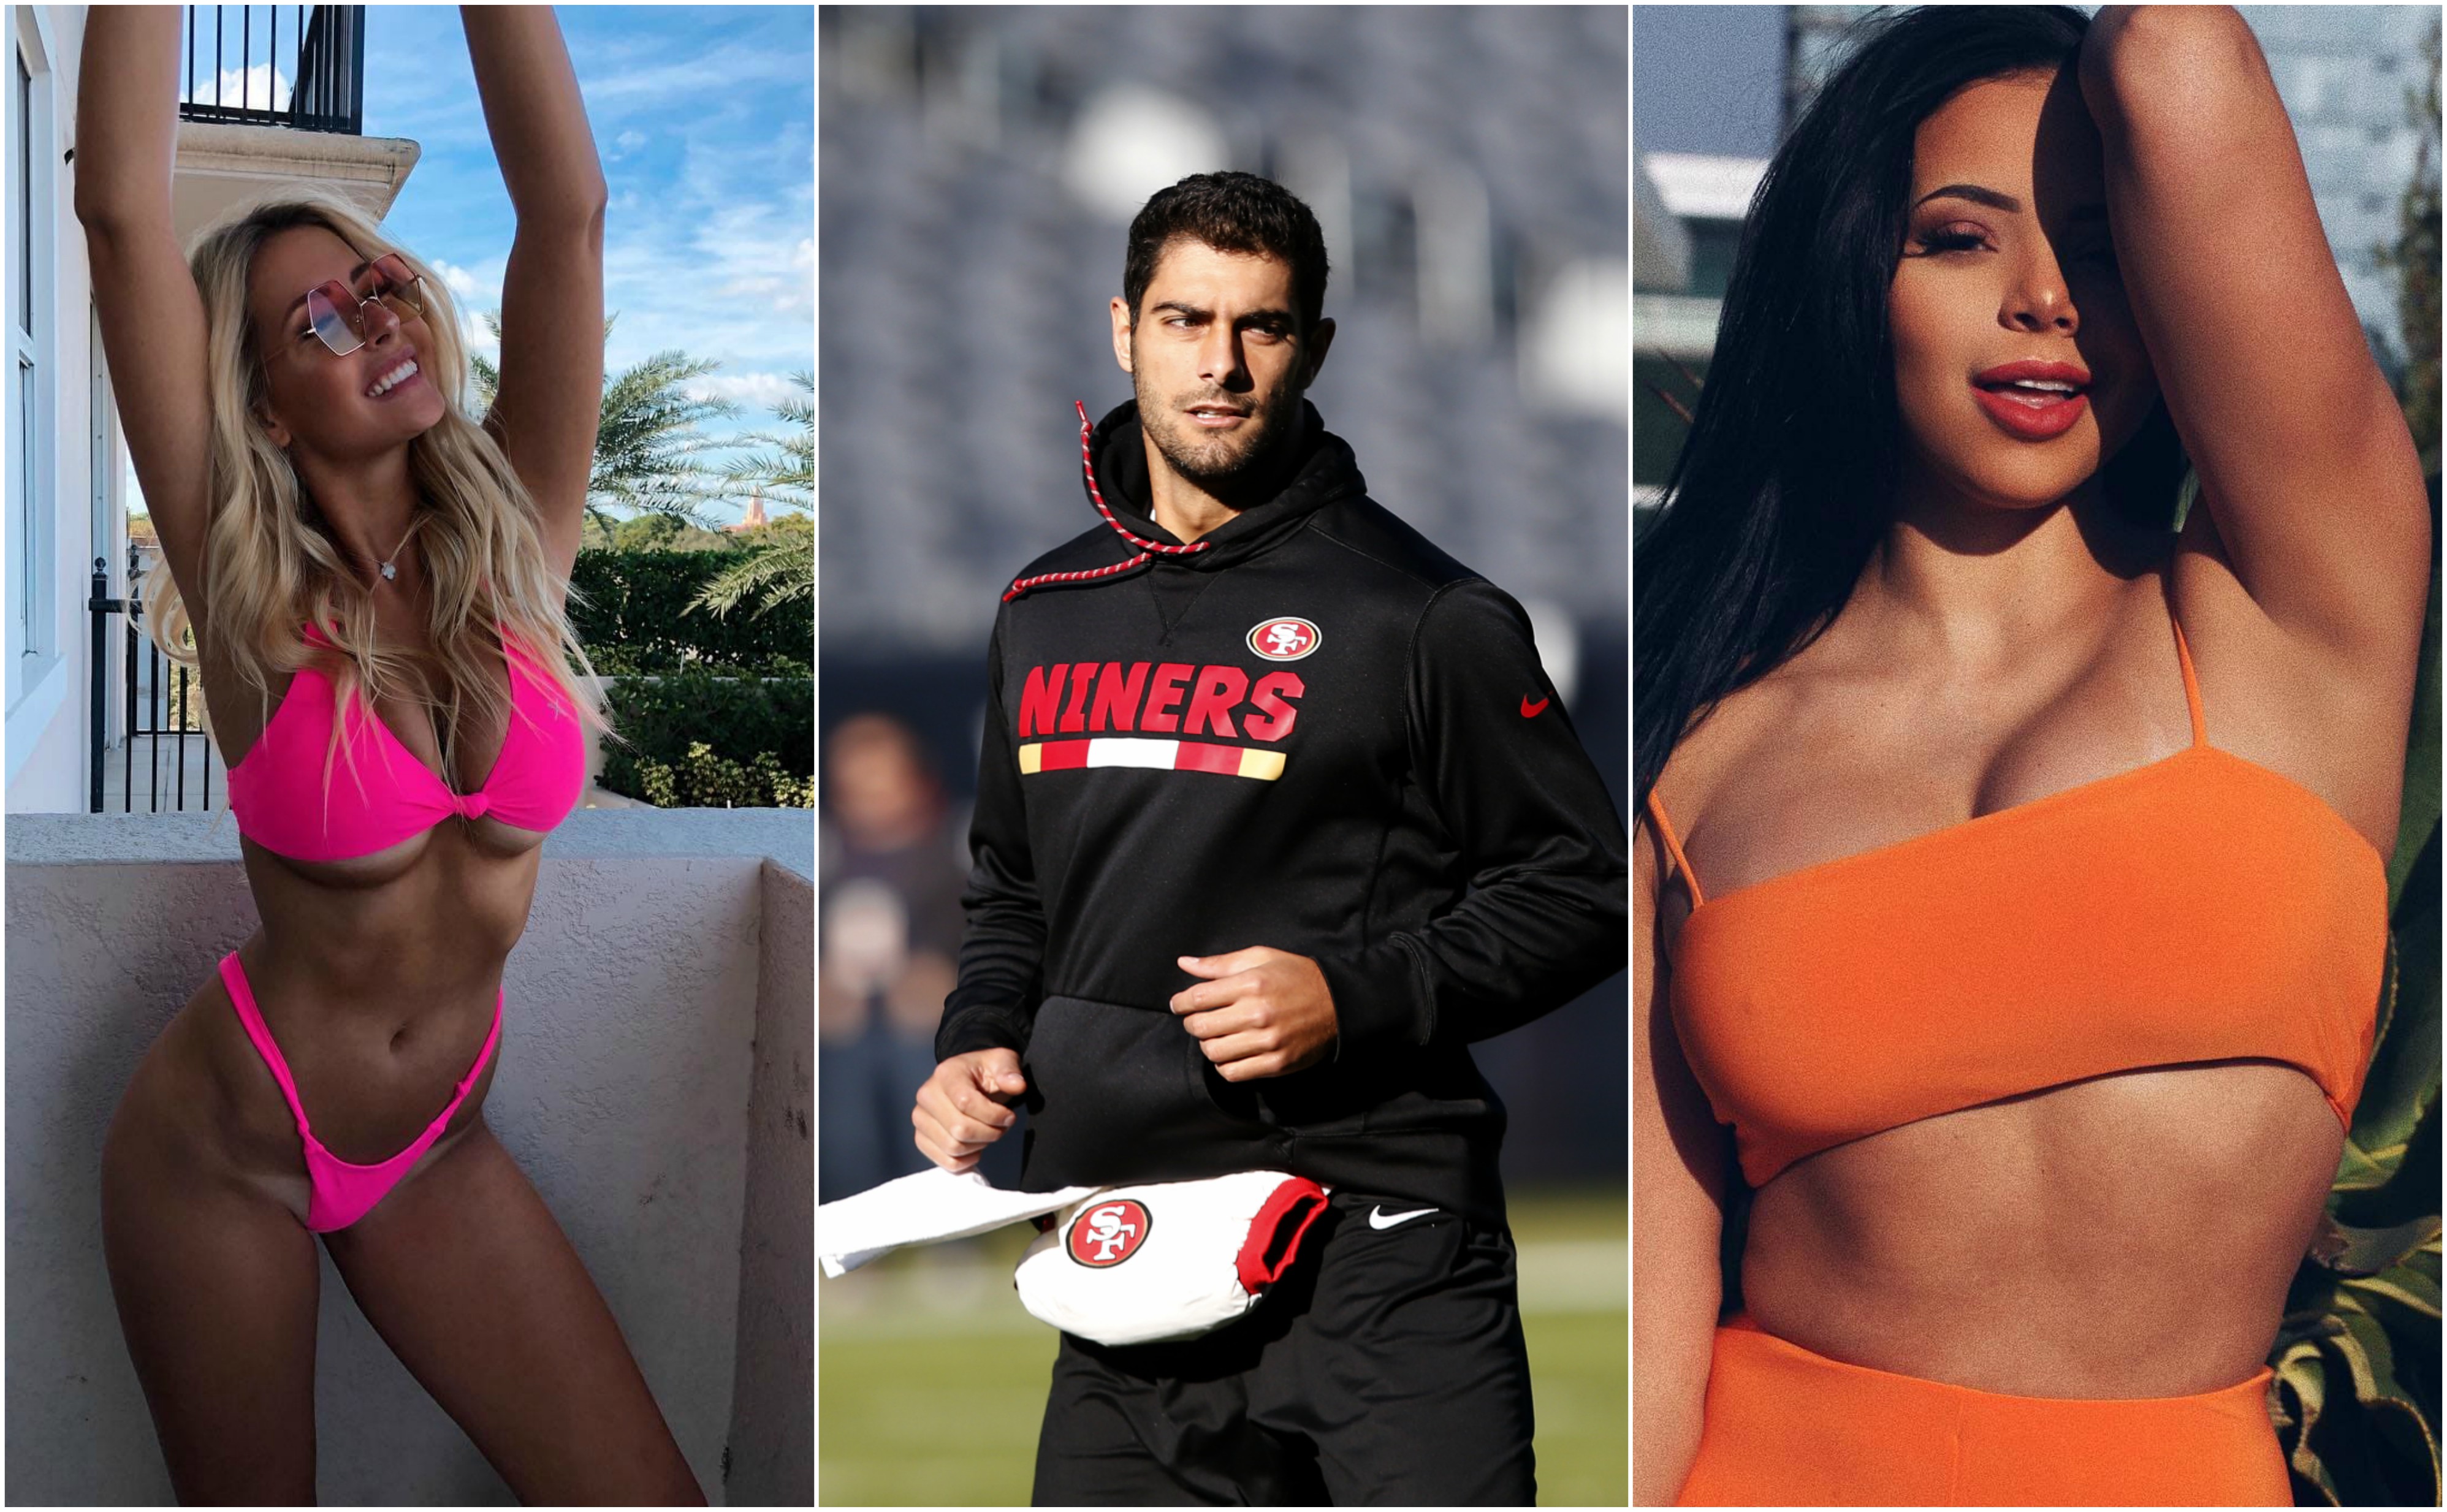 Jimmy Garoppolo Shoots His Shot With Multiple IG Models Just Before Valenti...